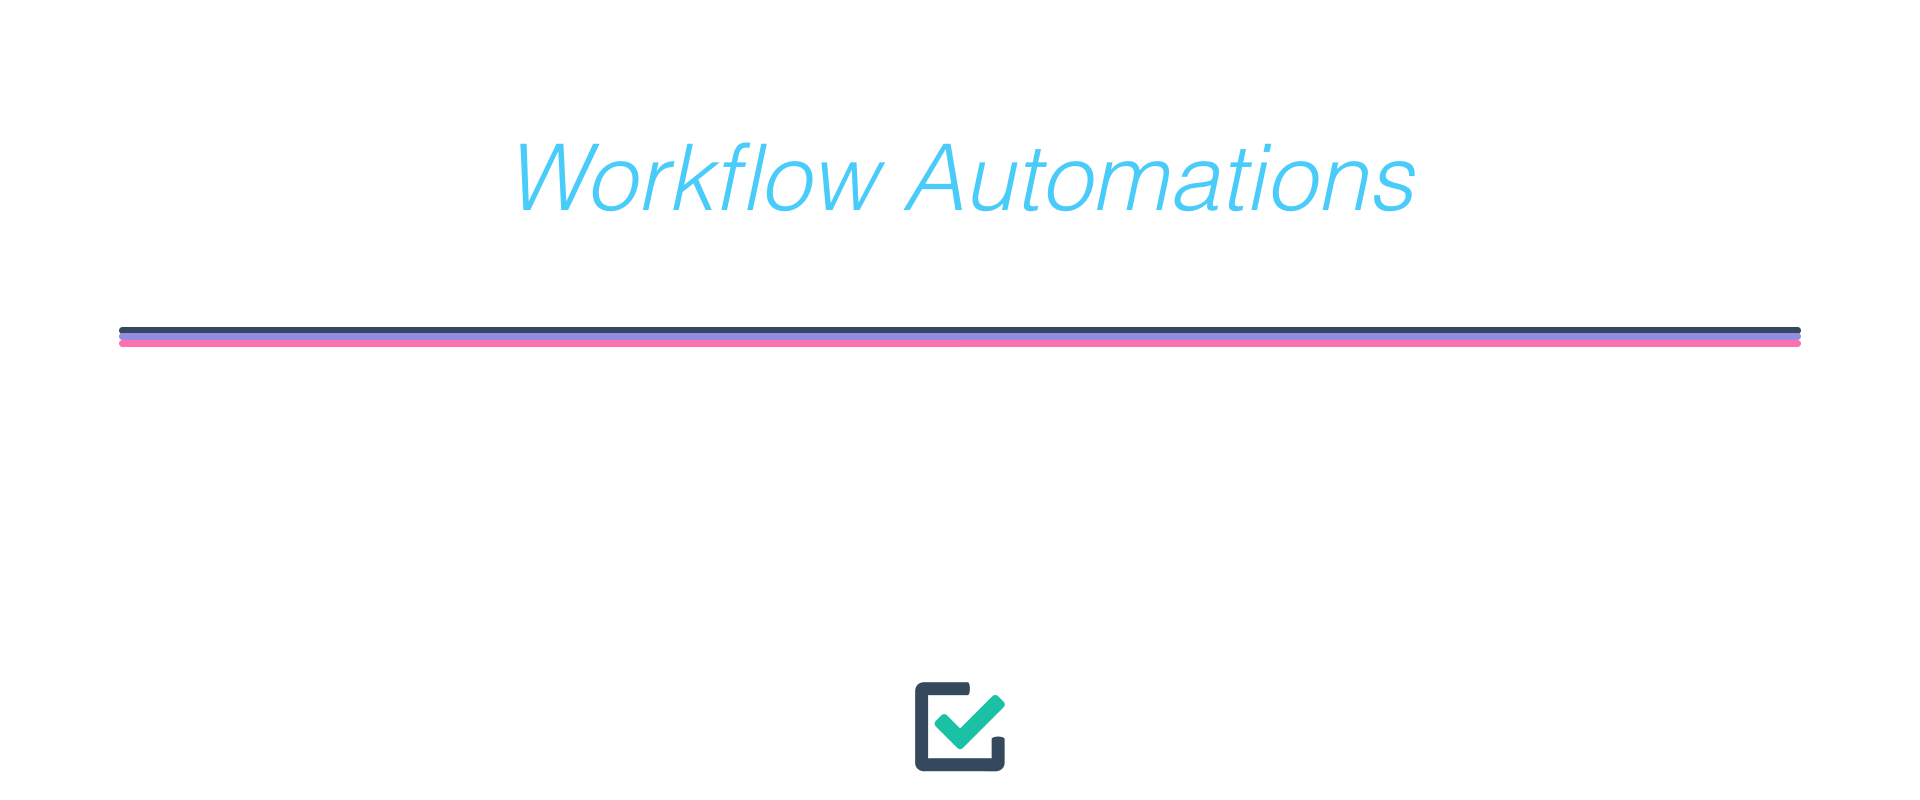 Workflow automations